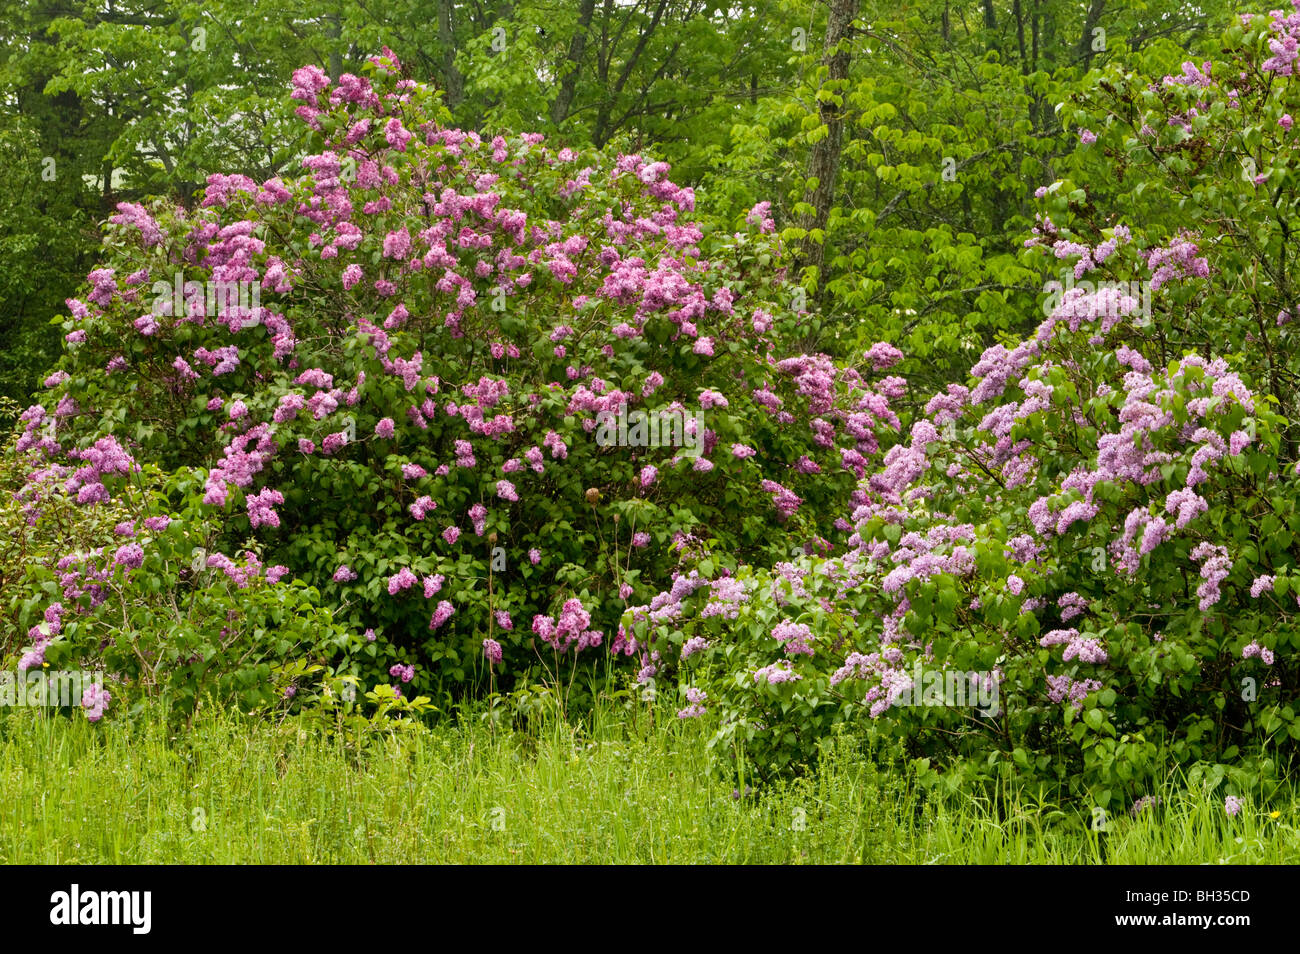 Lilac shrubs in bloom, near Little Current, Ontario, Canada Stock Photo